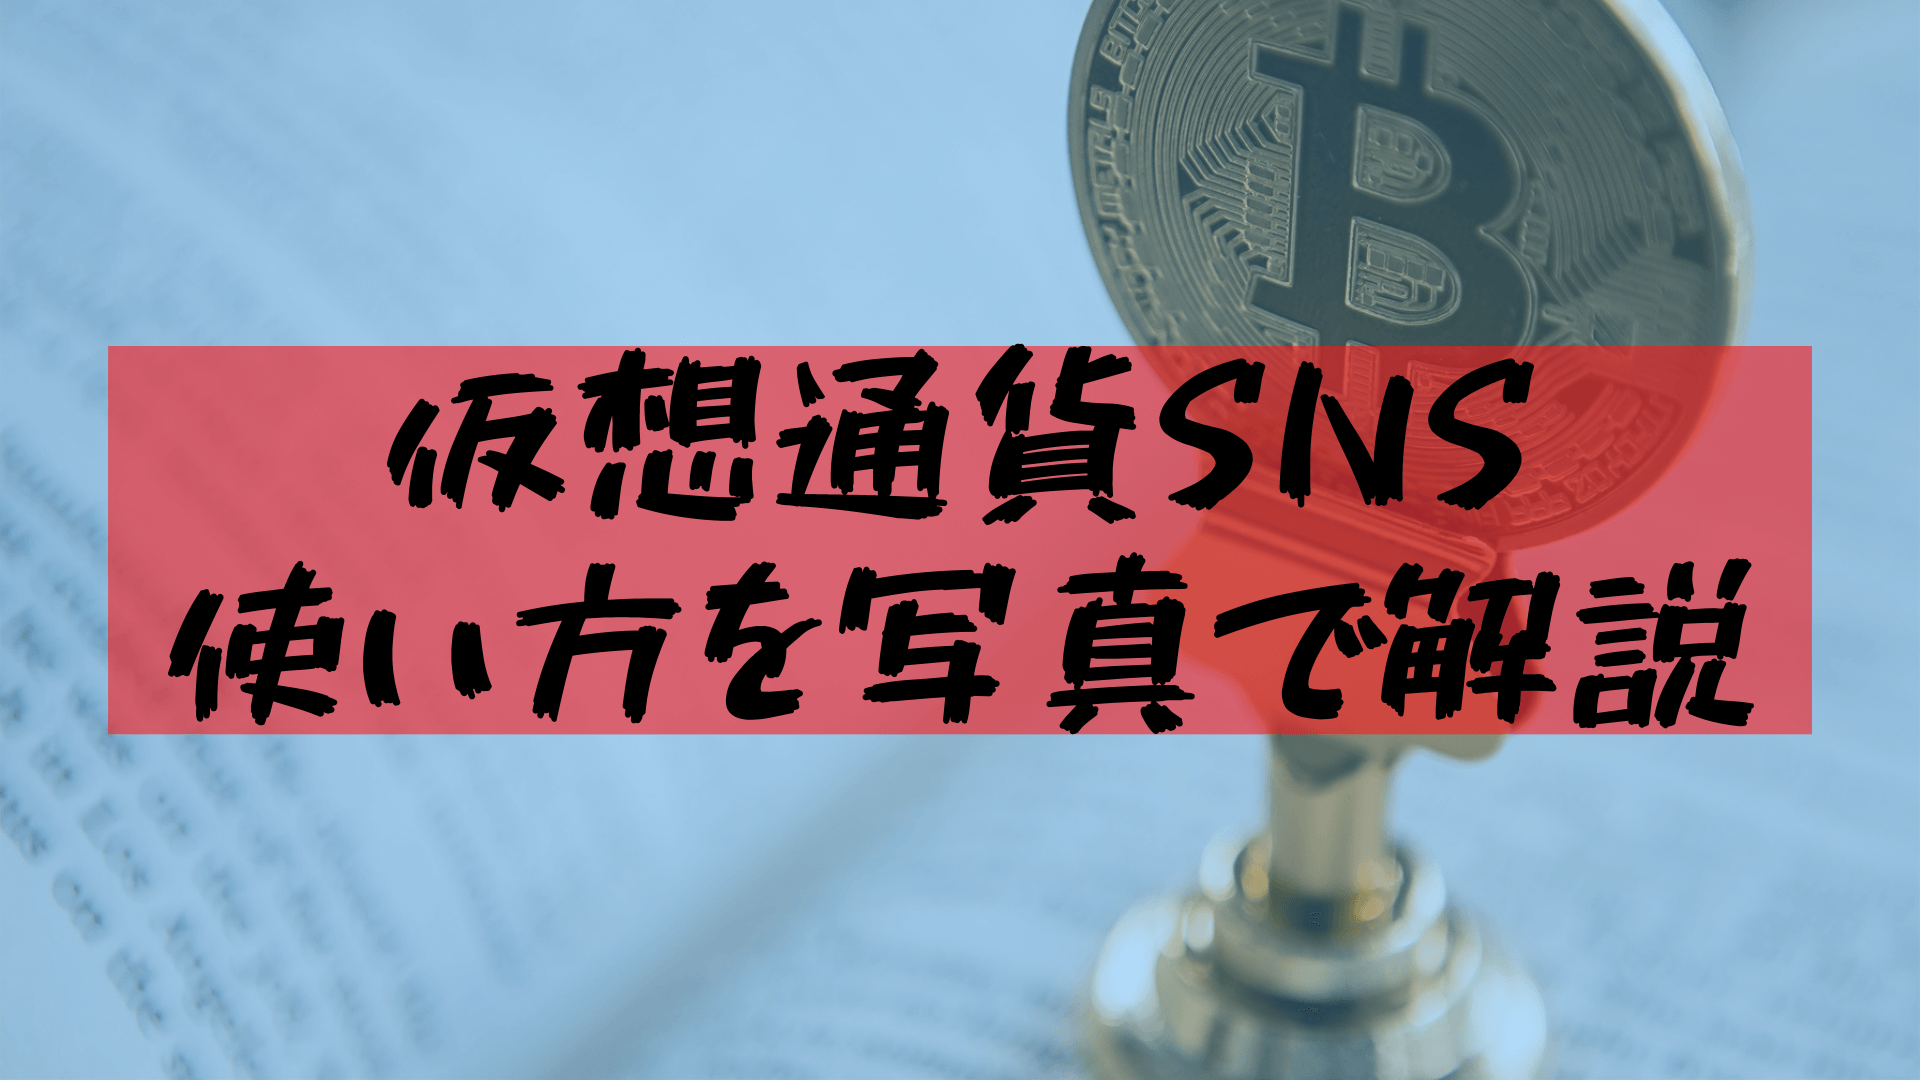 Links: How to use free send and receive virtual currency SNS